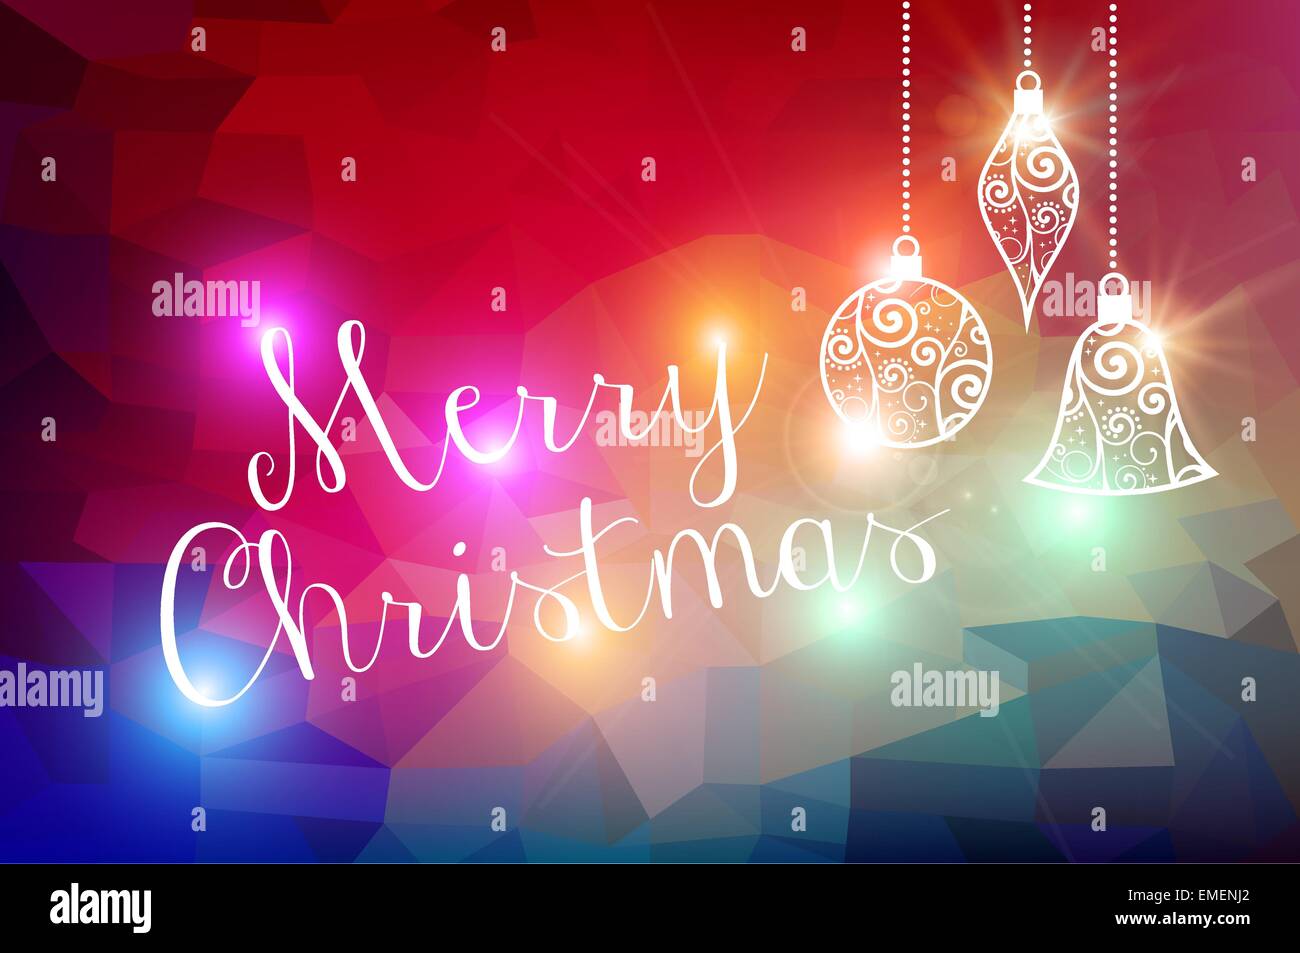 Chirstmas lights Stock Vector Images - Alamy